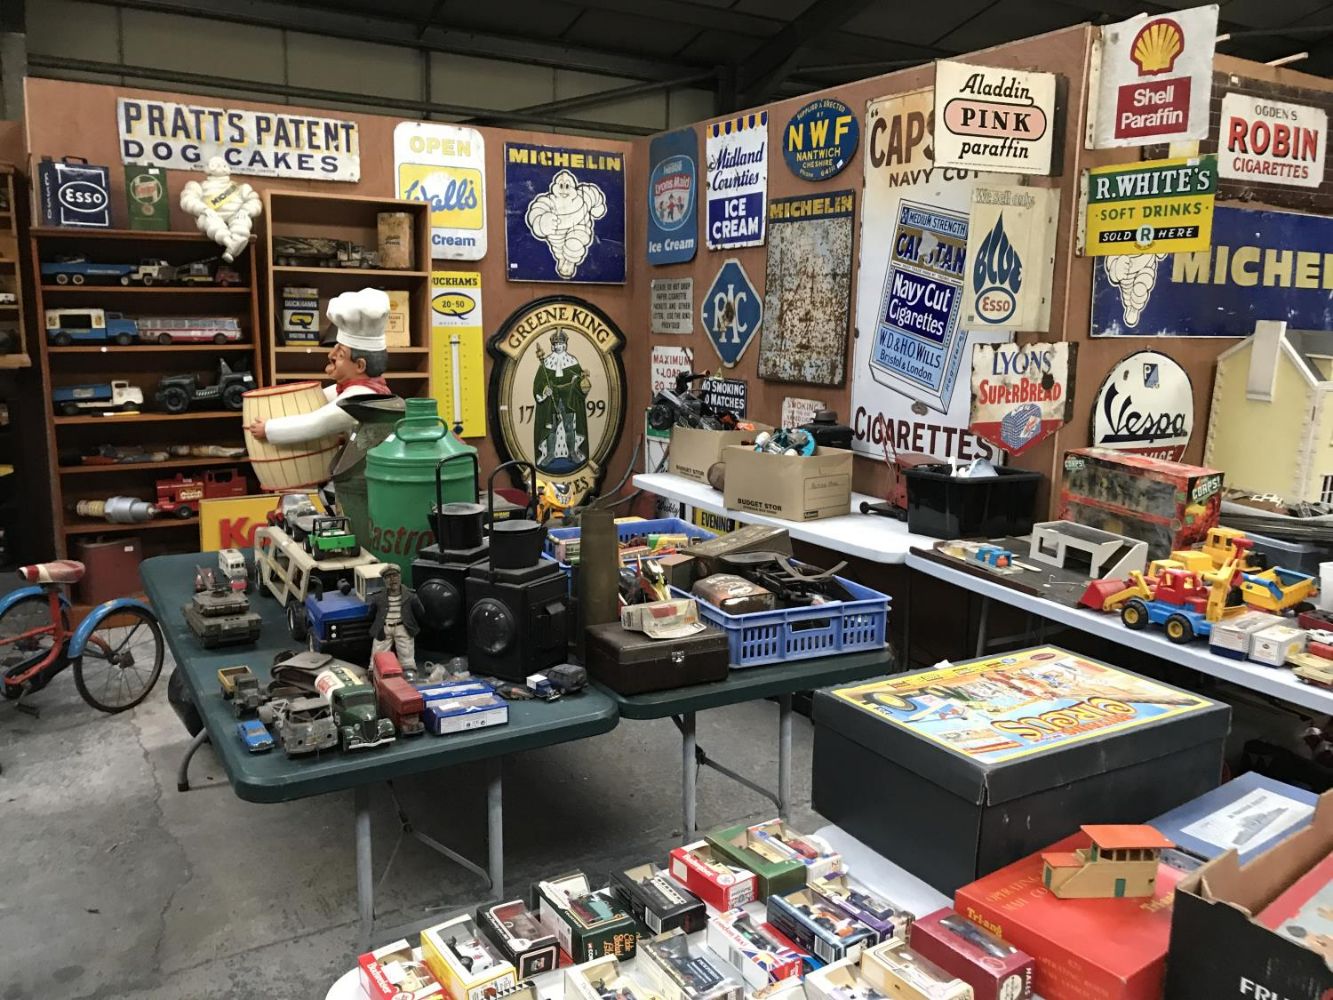 Two Day Auction Of Collectables, Antiques, Furniture, Vintage Items - with a special section for collectable books